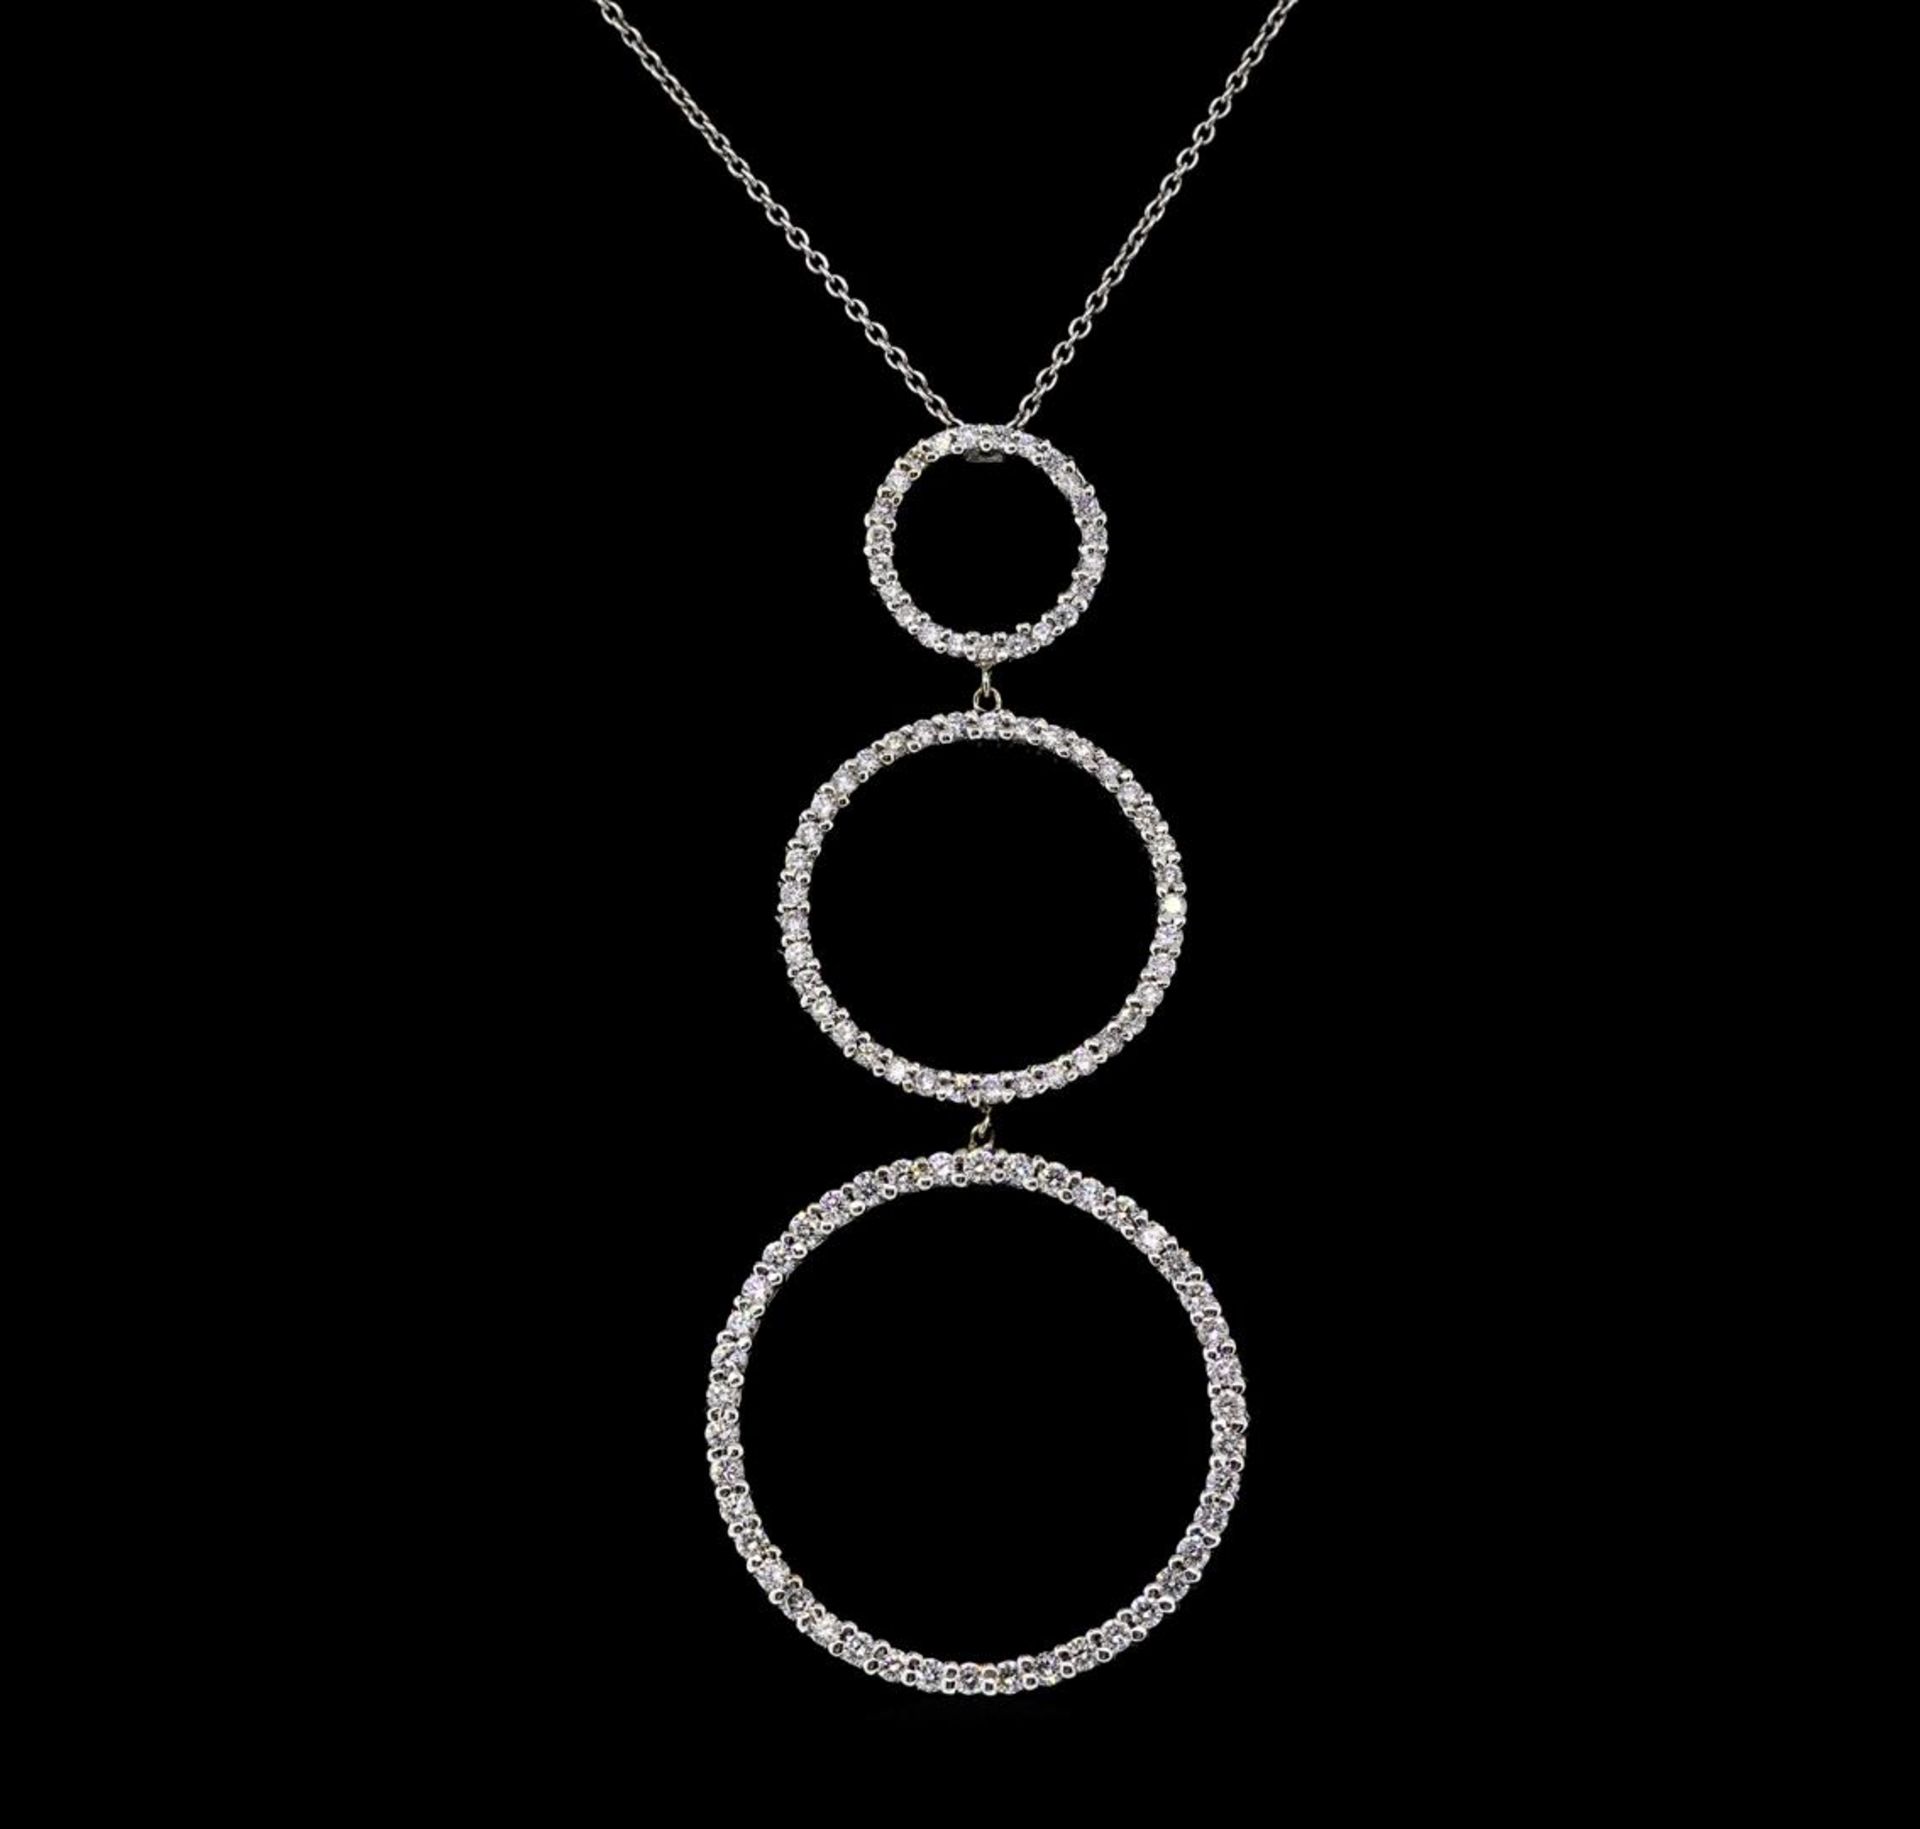 1.03 ctw Diamond Circle Pendant with Chain - 18KT White Gold - Image 2 of 2